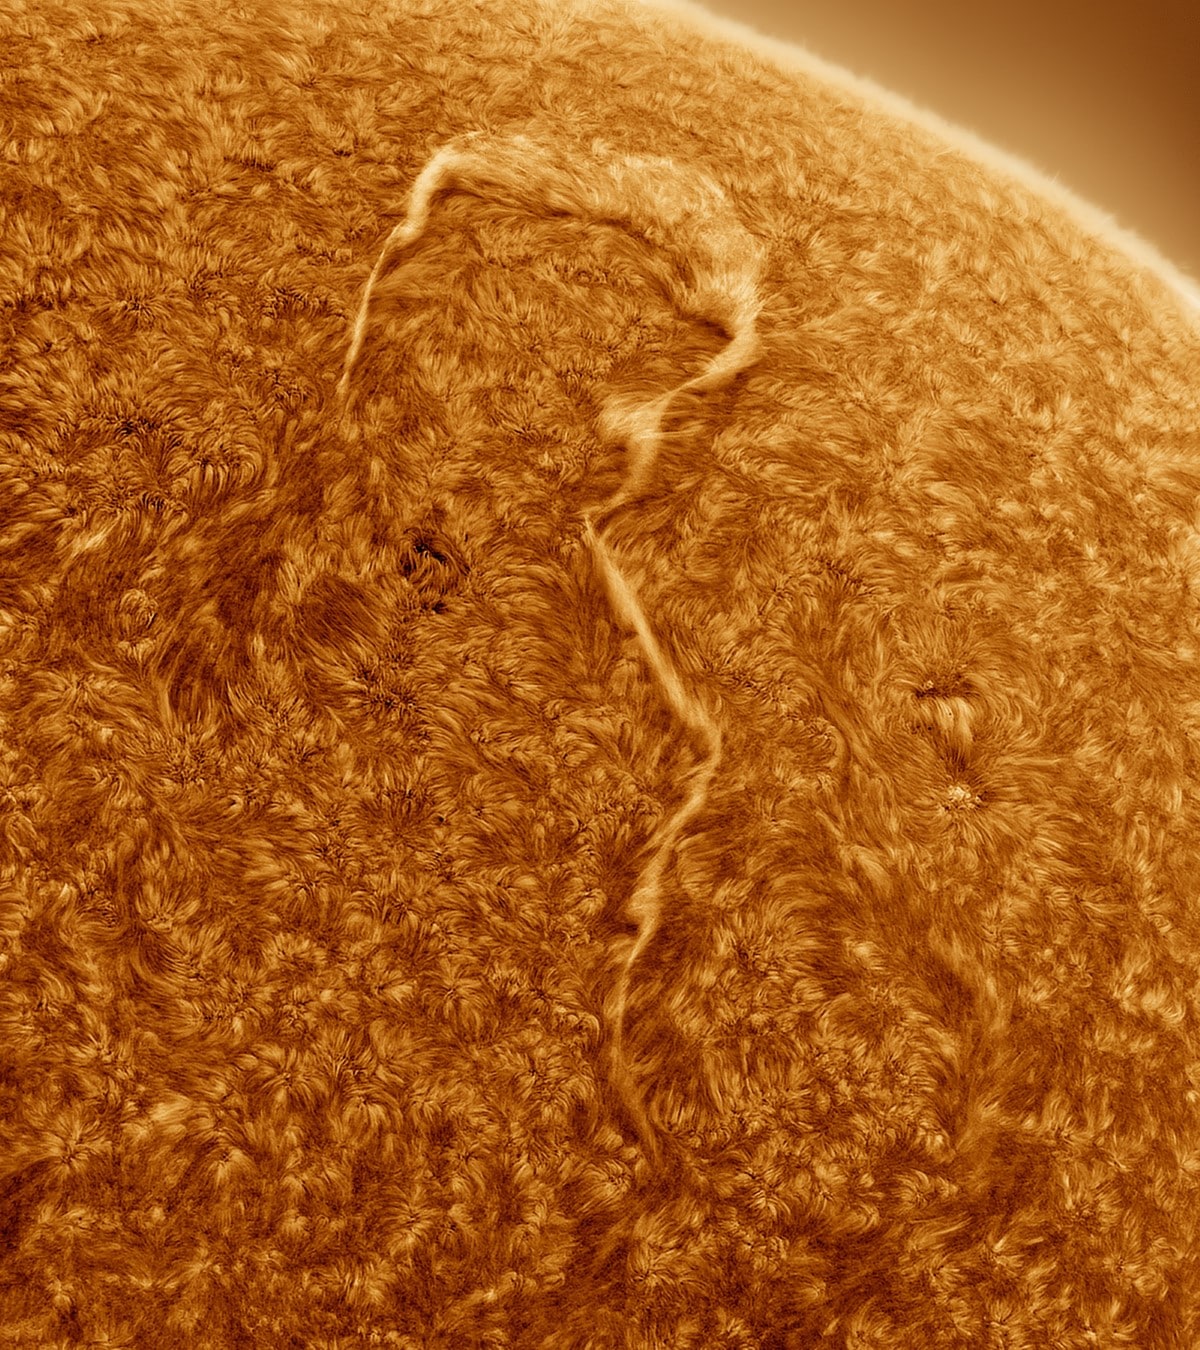 Sun with a huge filament in the shape of a question mark